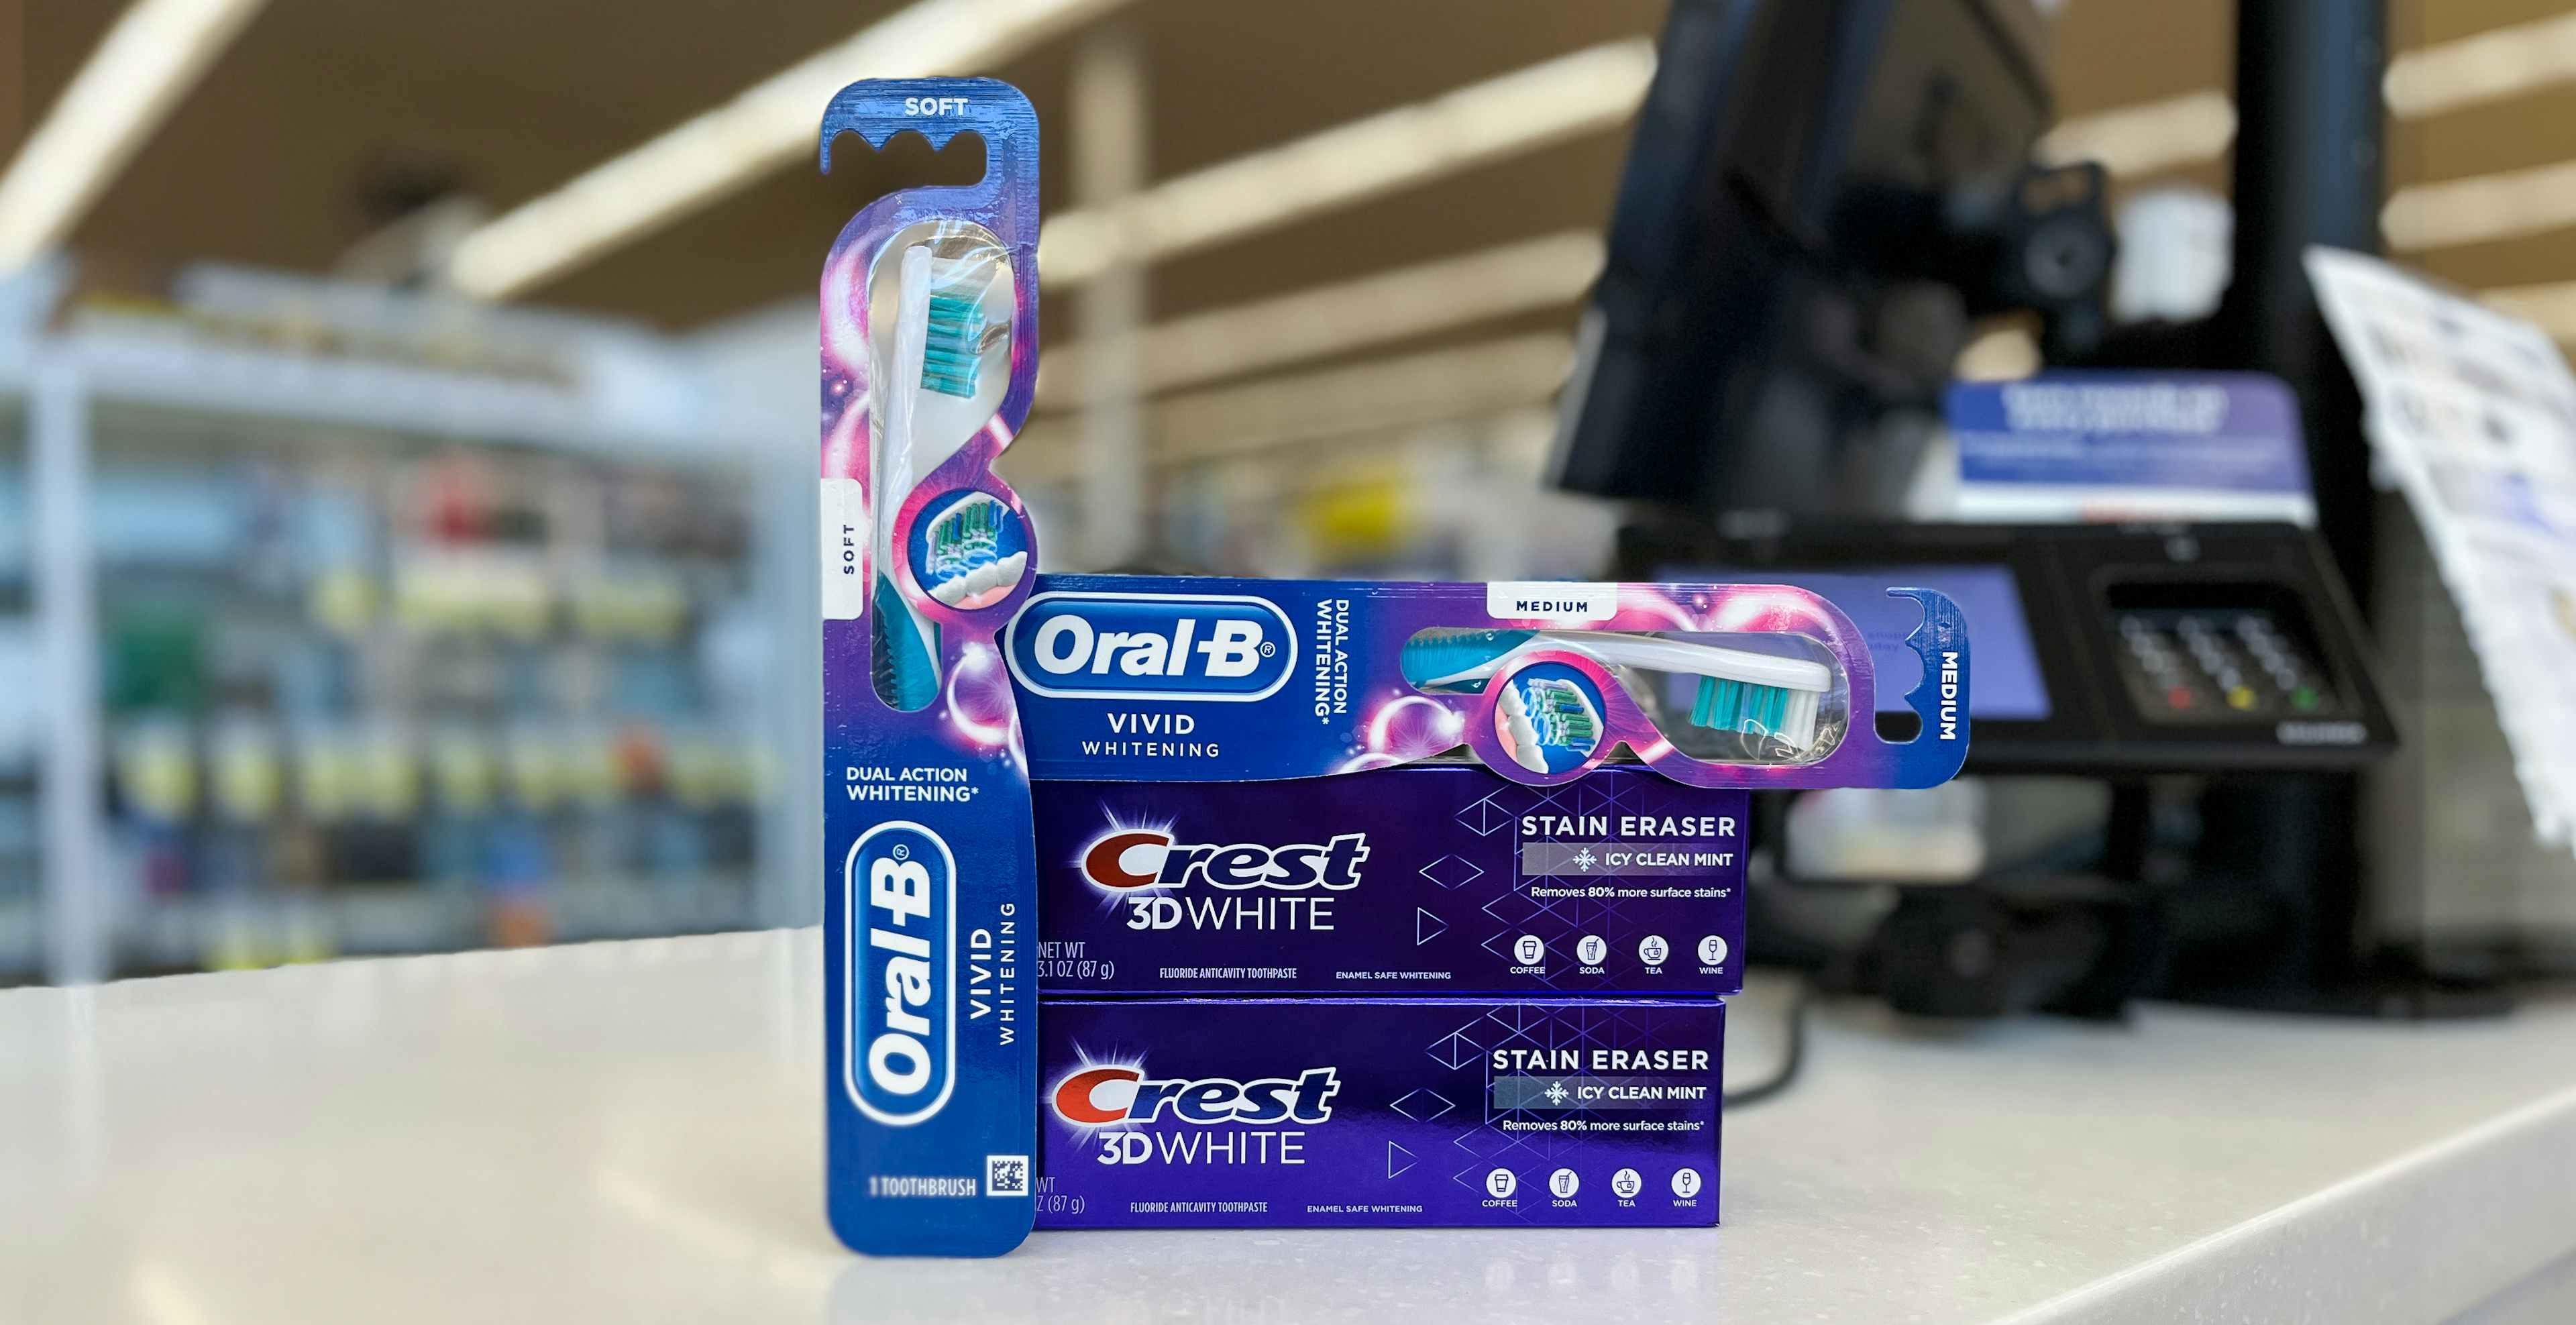 crest 3d white stain eraser toothpaste and oral-b vivid whitening toothbrush on a checkout counter